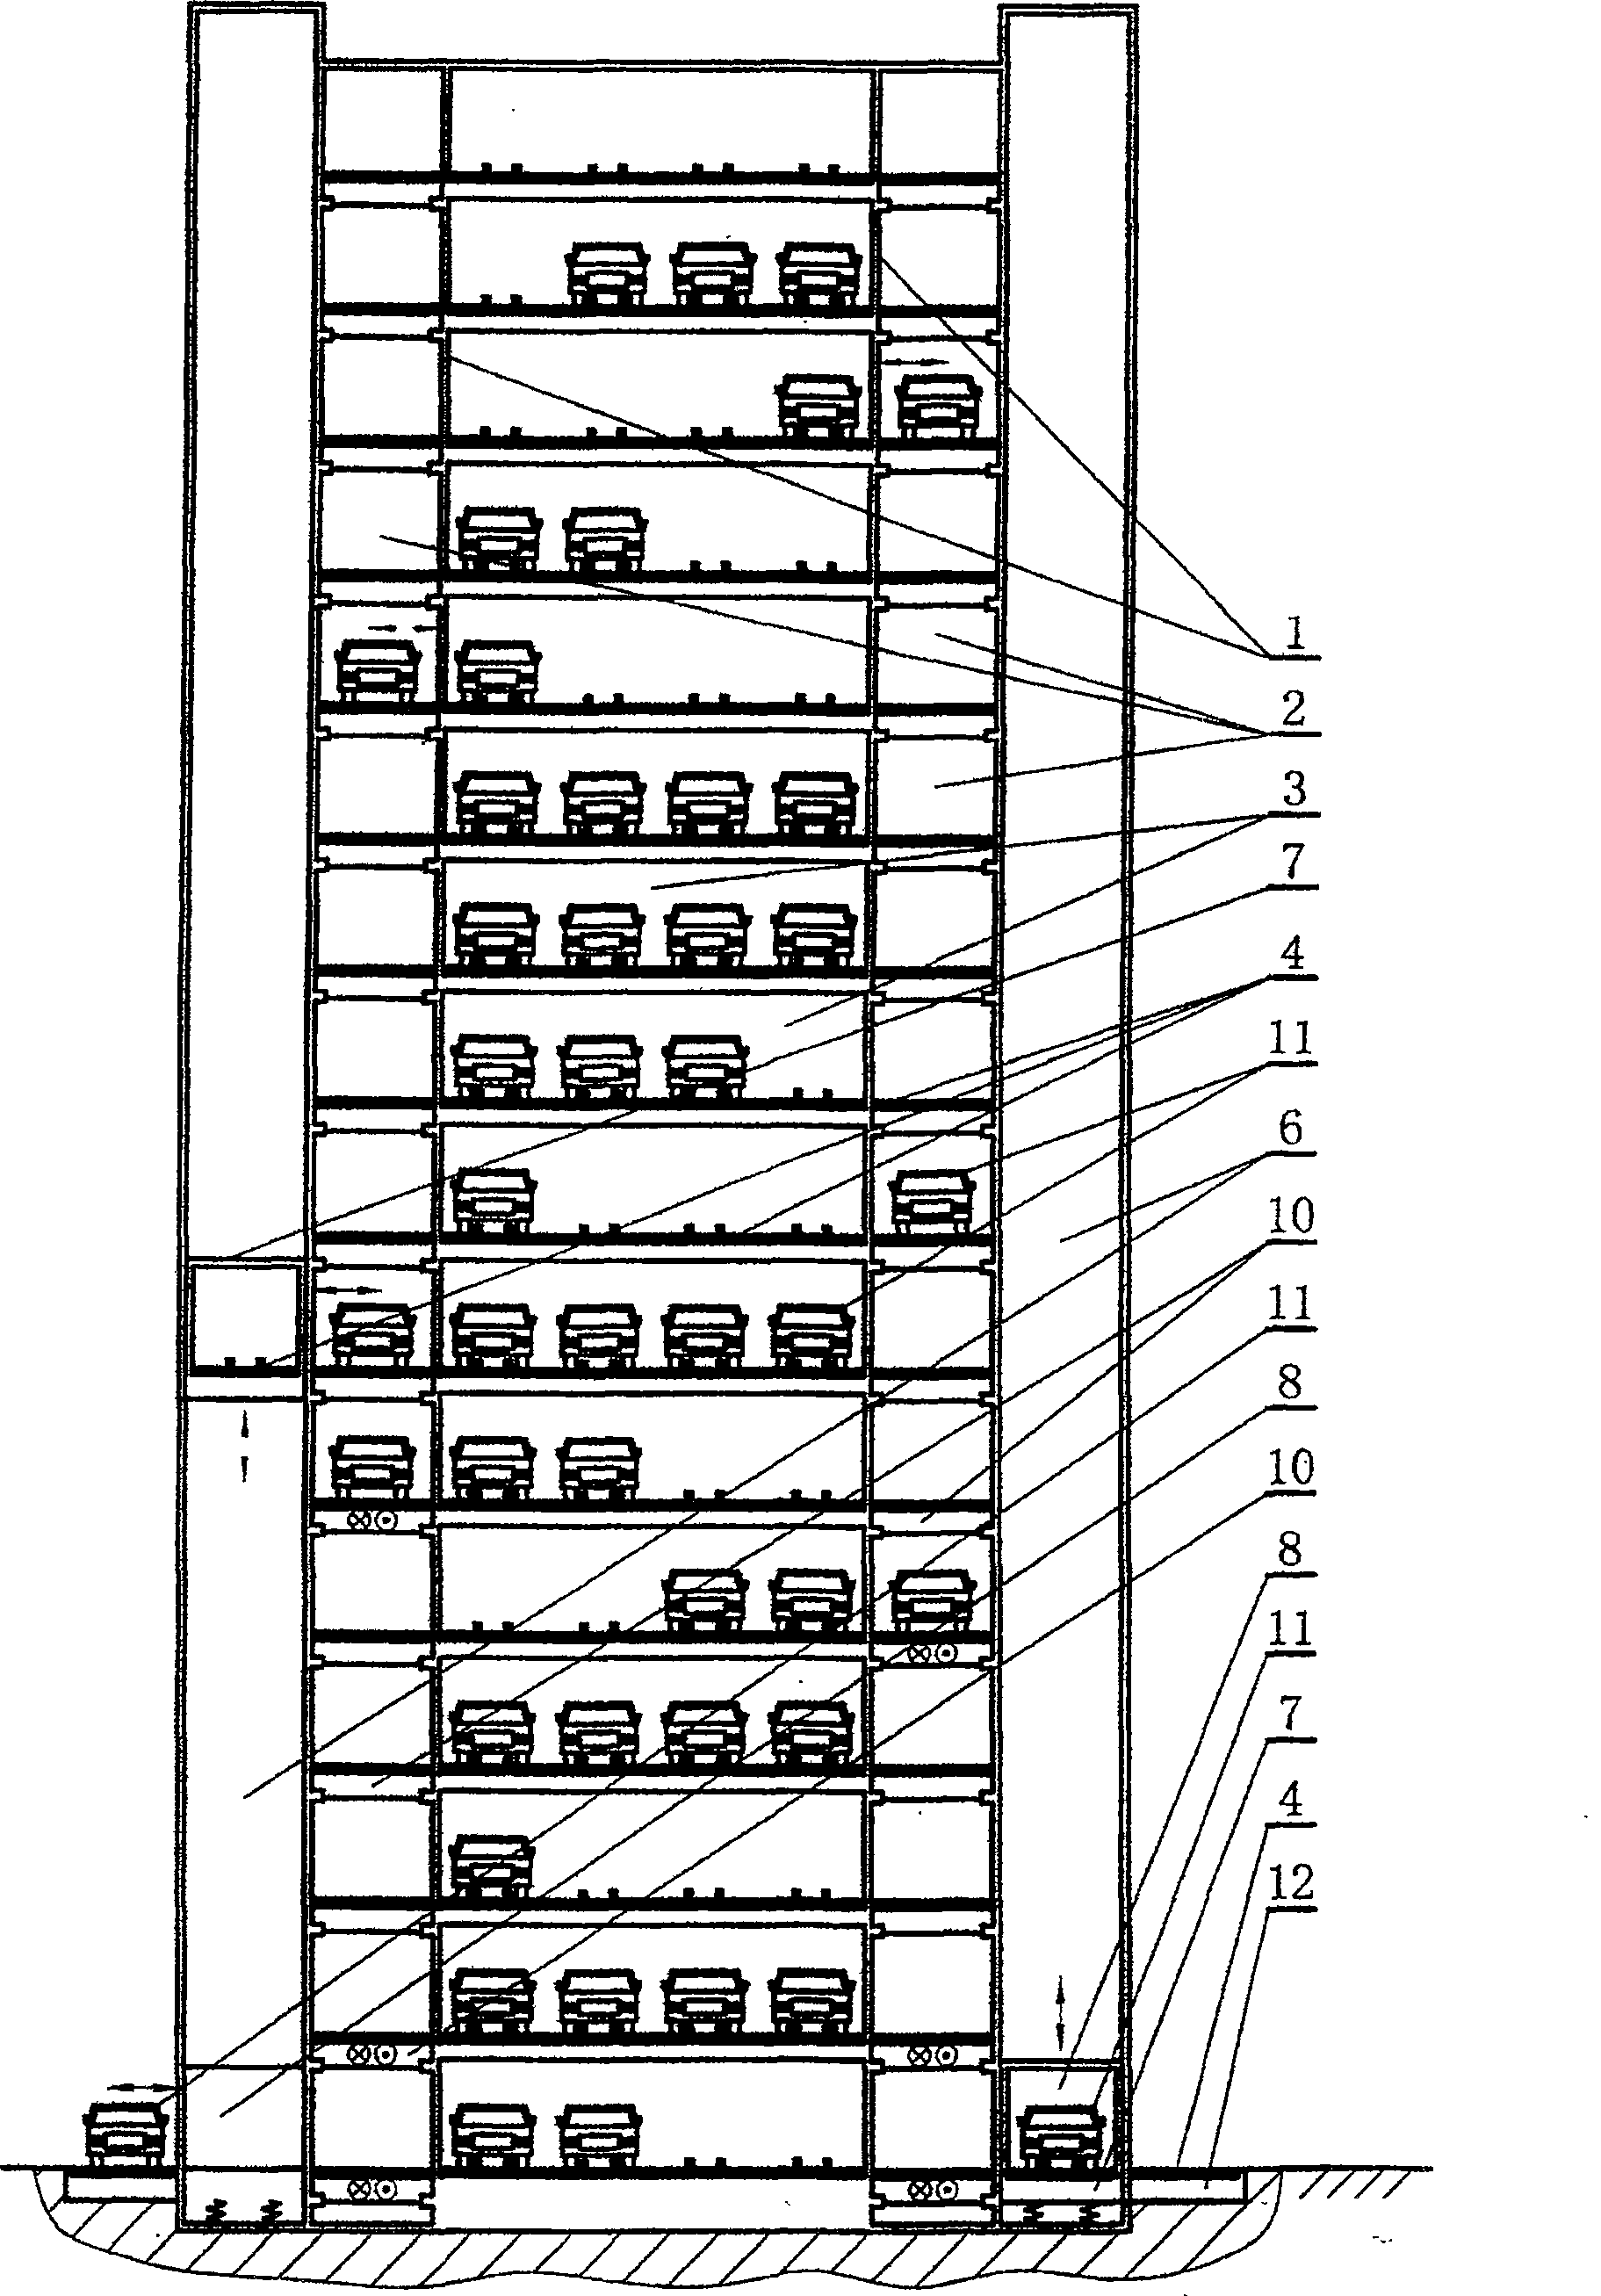 Double alley way layered carrying rollaway side by side storing type mechanical type parking system